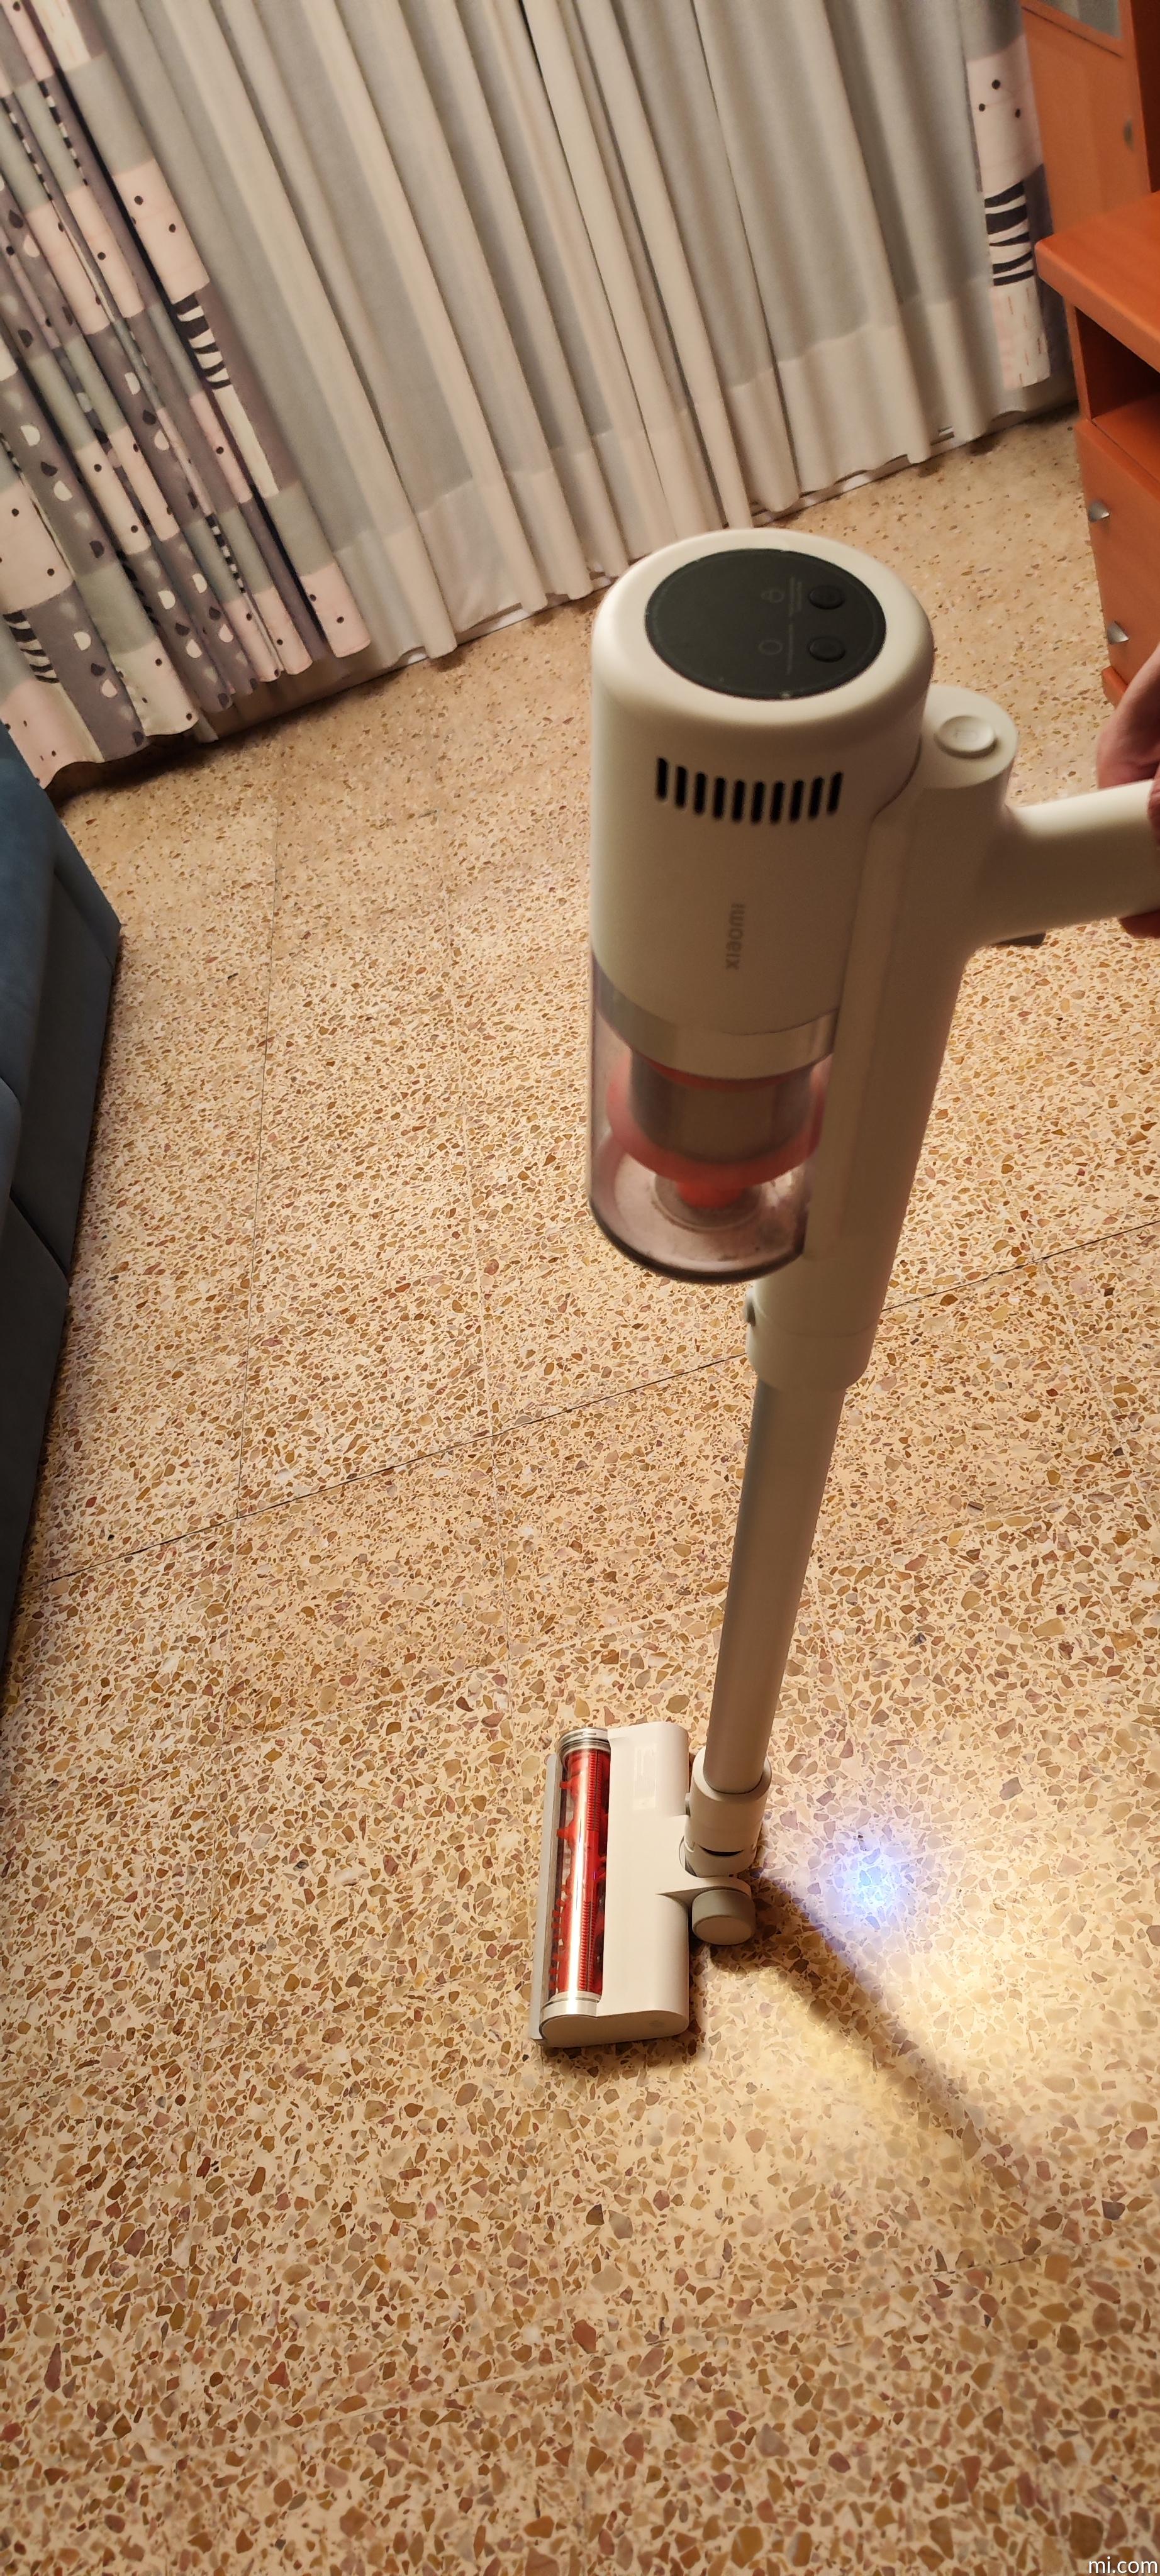 Xiaomi,G11 Vacuum Cleaner By Xiaomi,Best Online Shopping Price in